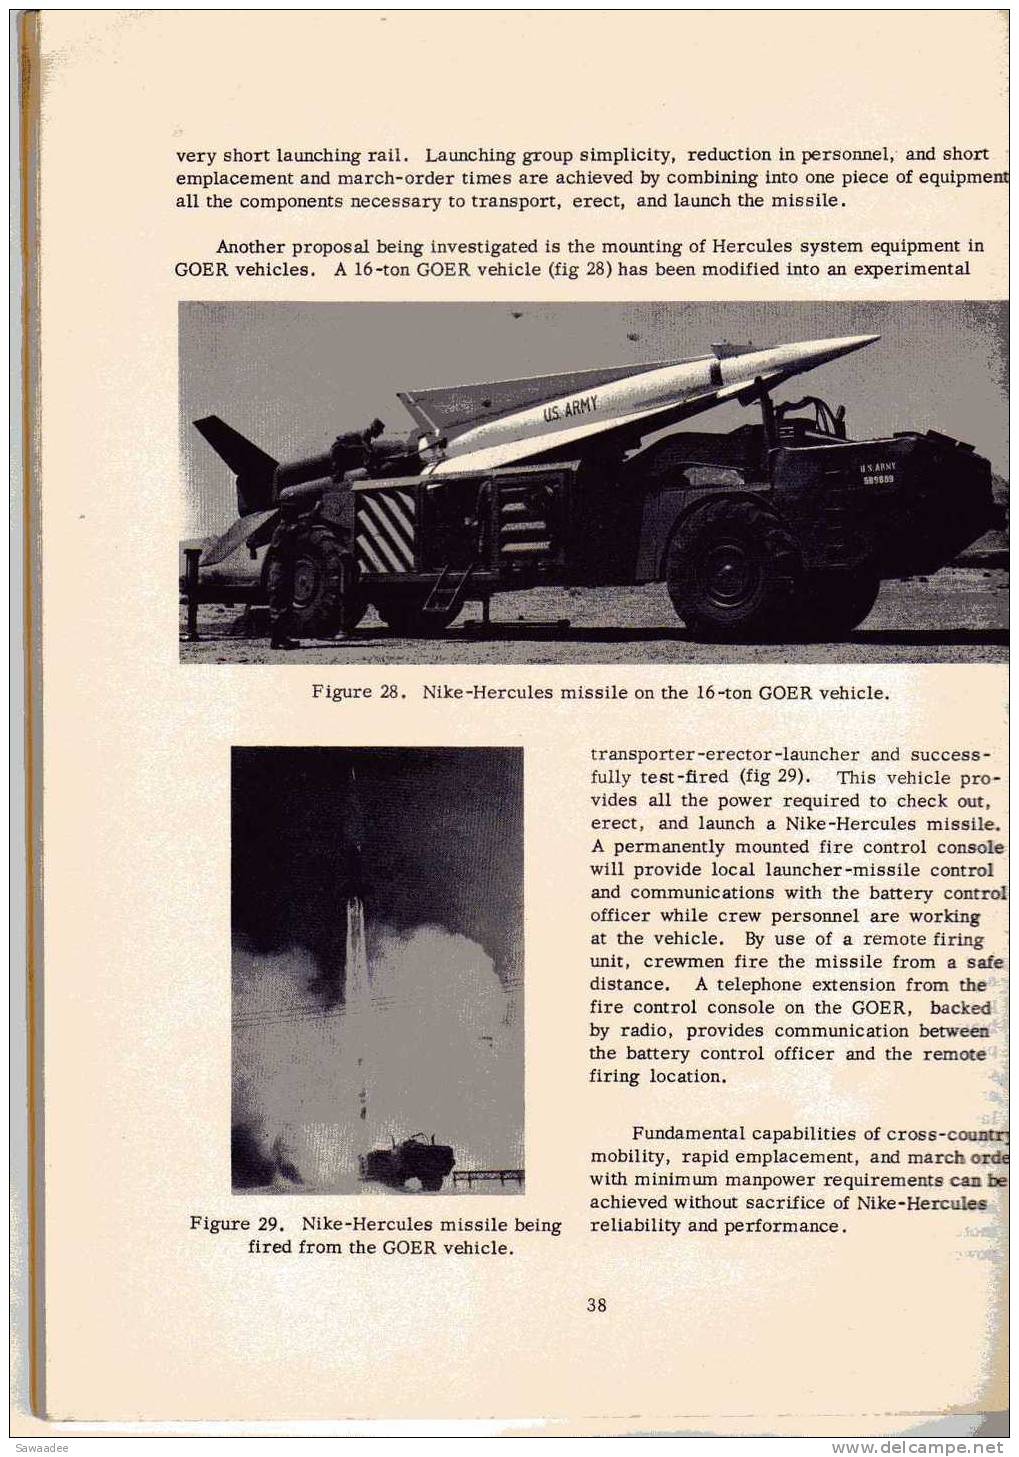 DOCUMENT - MILITARIA  - U.S. ARMY AIR DEFENSE -  FORT BLISS - TEXAS - 1962/63 - 78 PAGES - NBRES ILLUSTRATIONS, PHOTOS - Guerres Impliquant US